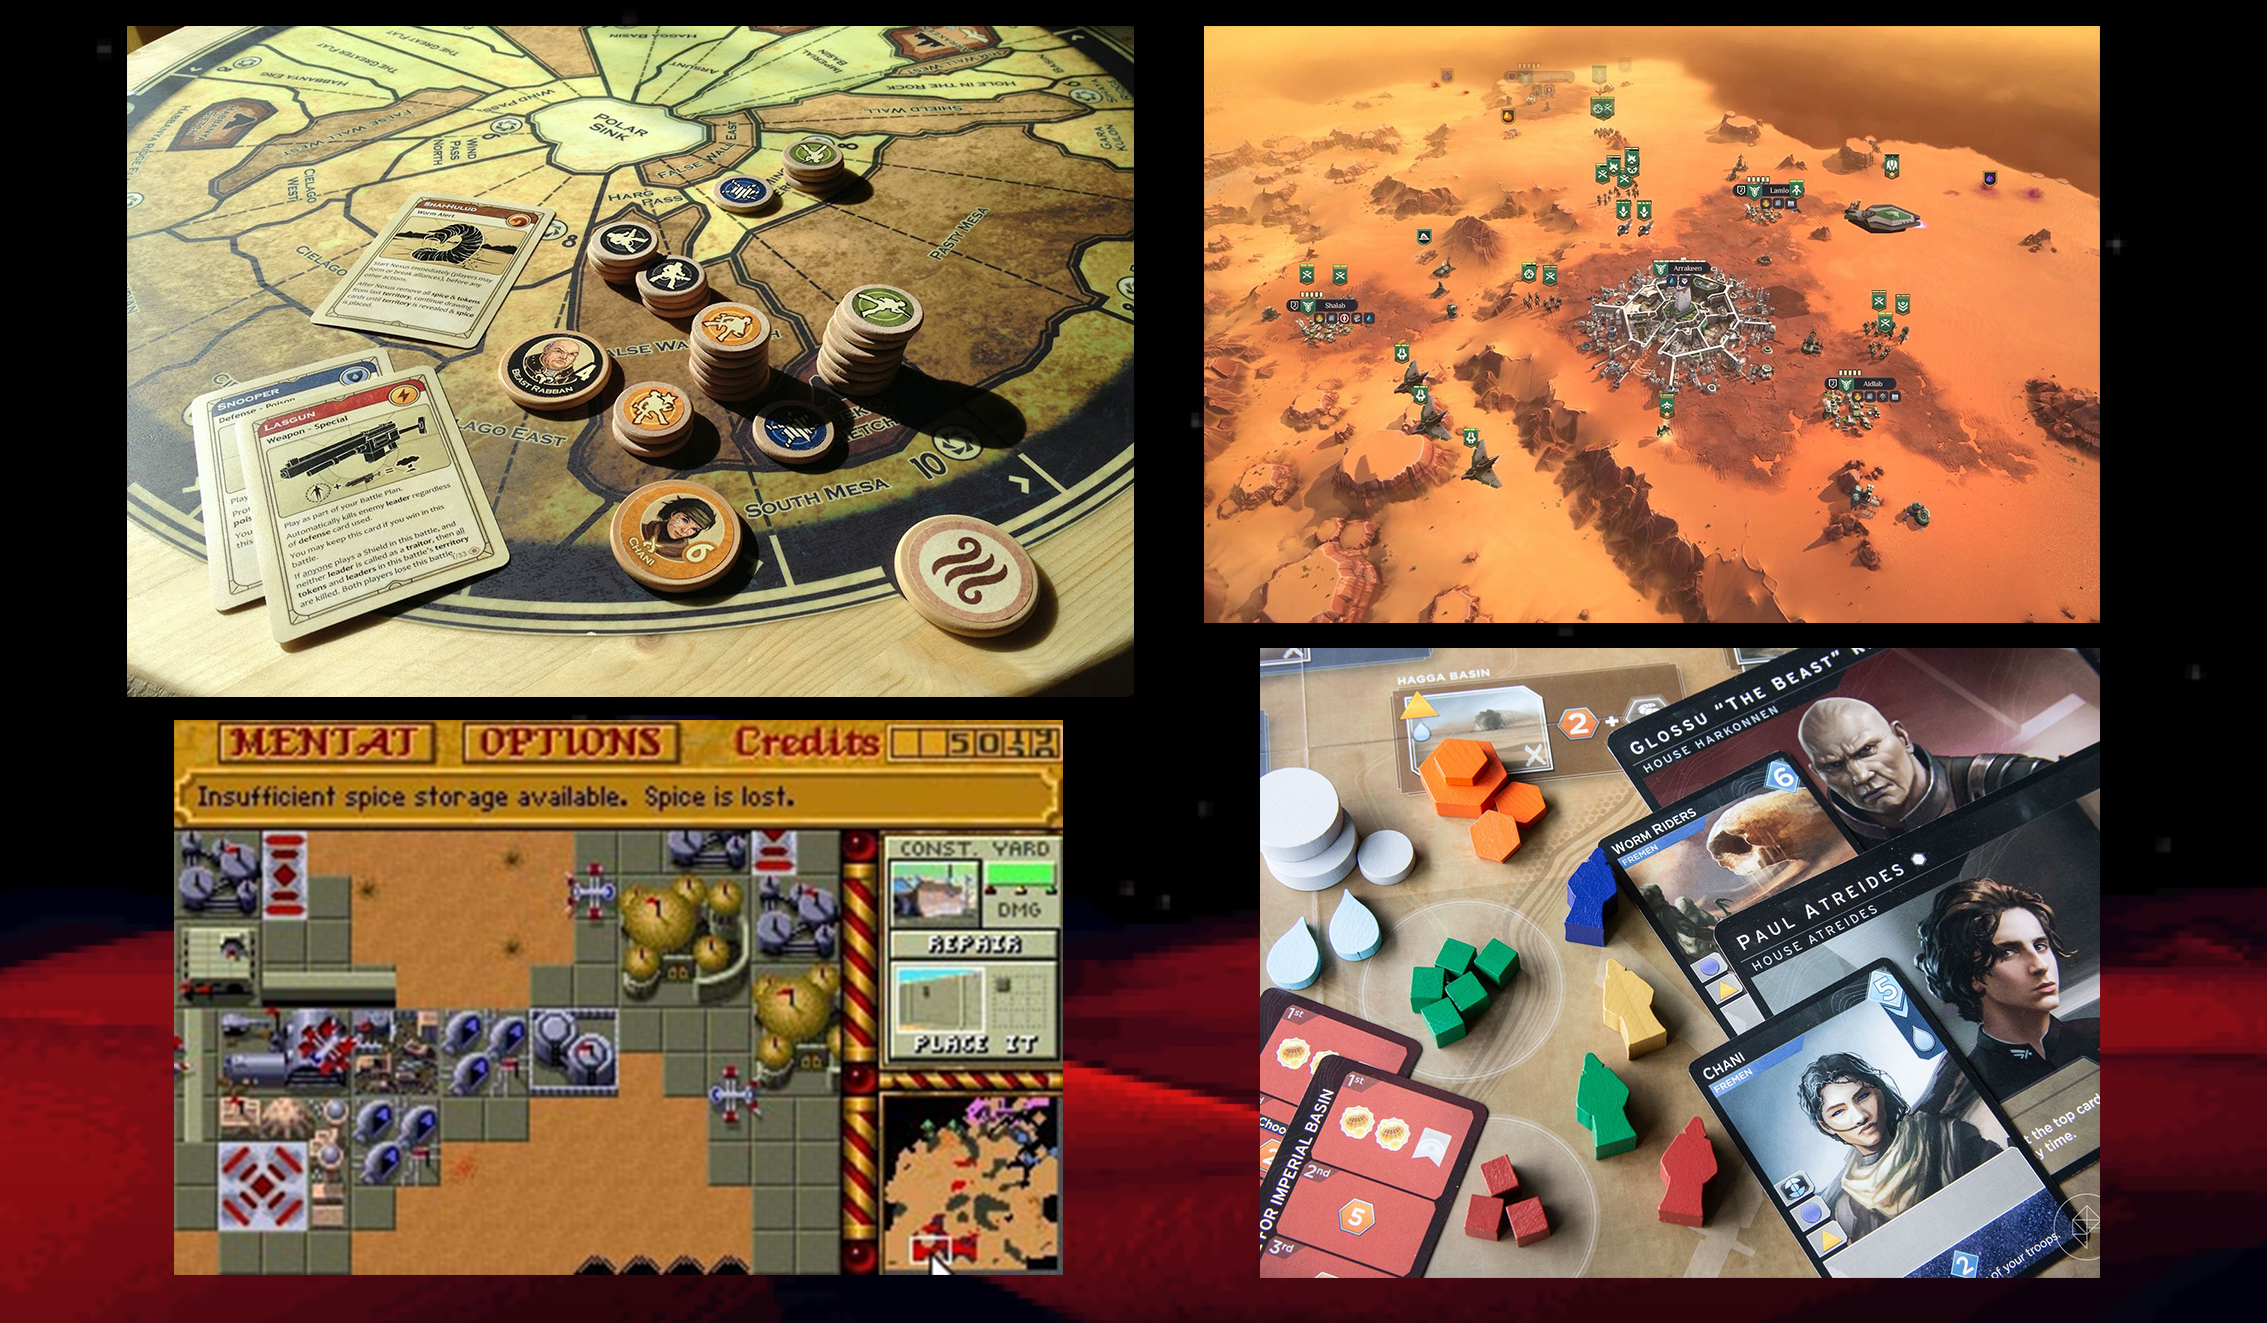 Screenshots from Dune 2 and Dune: Spice Wars alongside product shots for Dune Imperium and Dune: A Game of Conquest, Diplomacy &amp; Betrayal